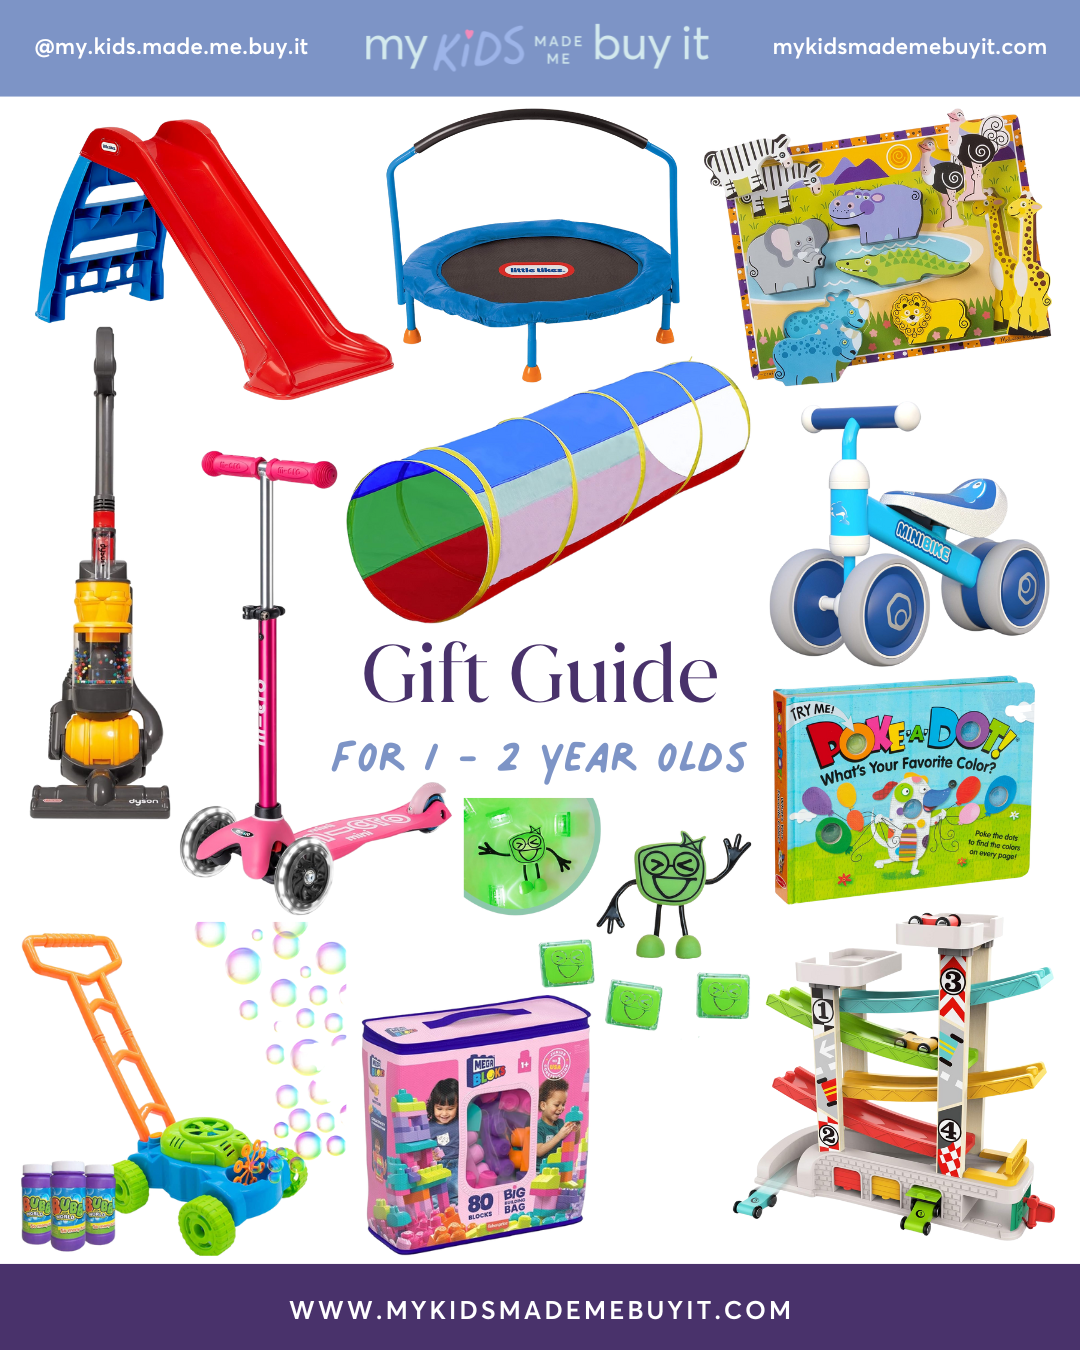 Gift Guide for 1 - 2 Year Olds